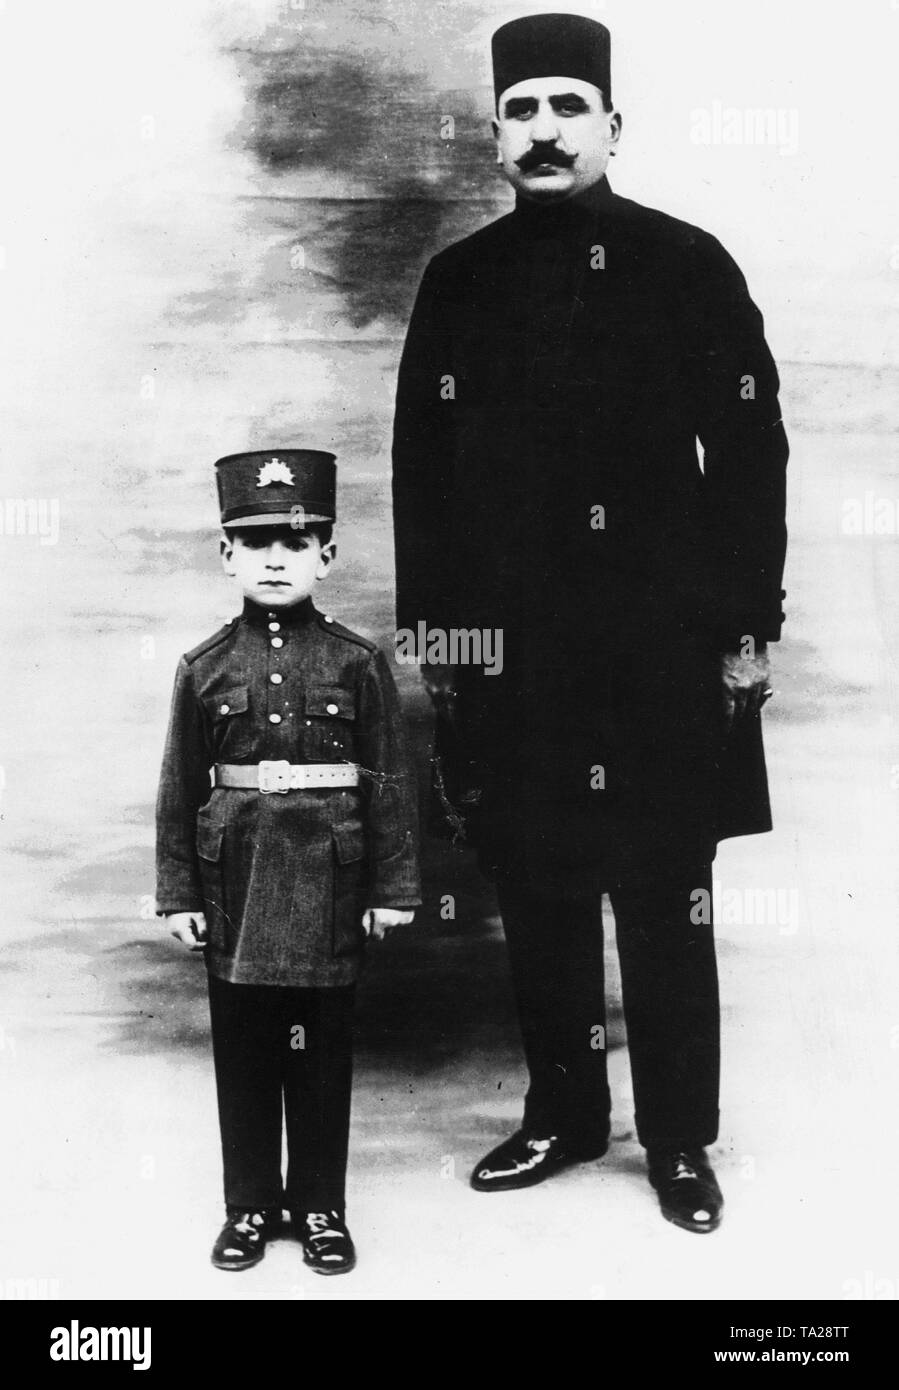 The Crown Prince Mohammad Reza Pahlavi as a seven year old boy with his uncle Amir Akram, who was also responsible for his personal safety. Stock Photo